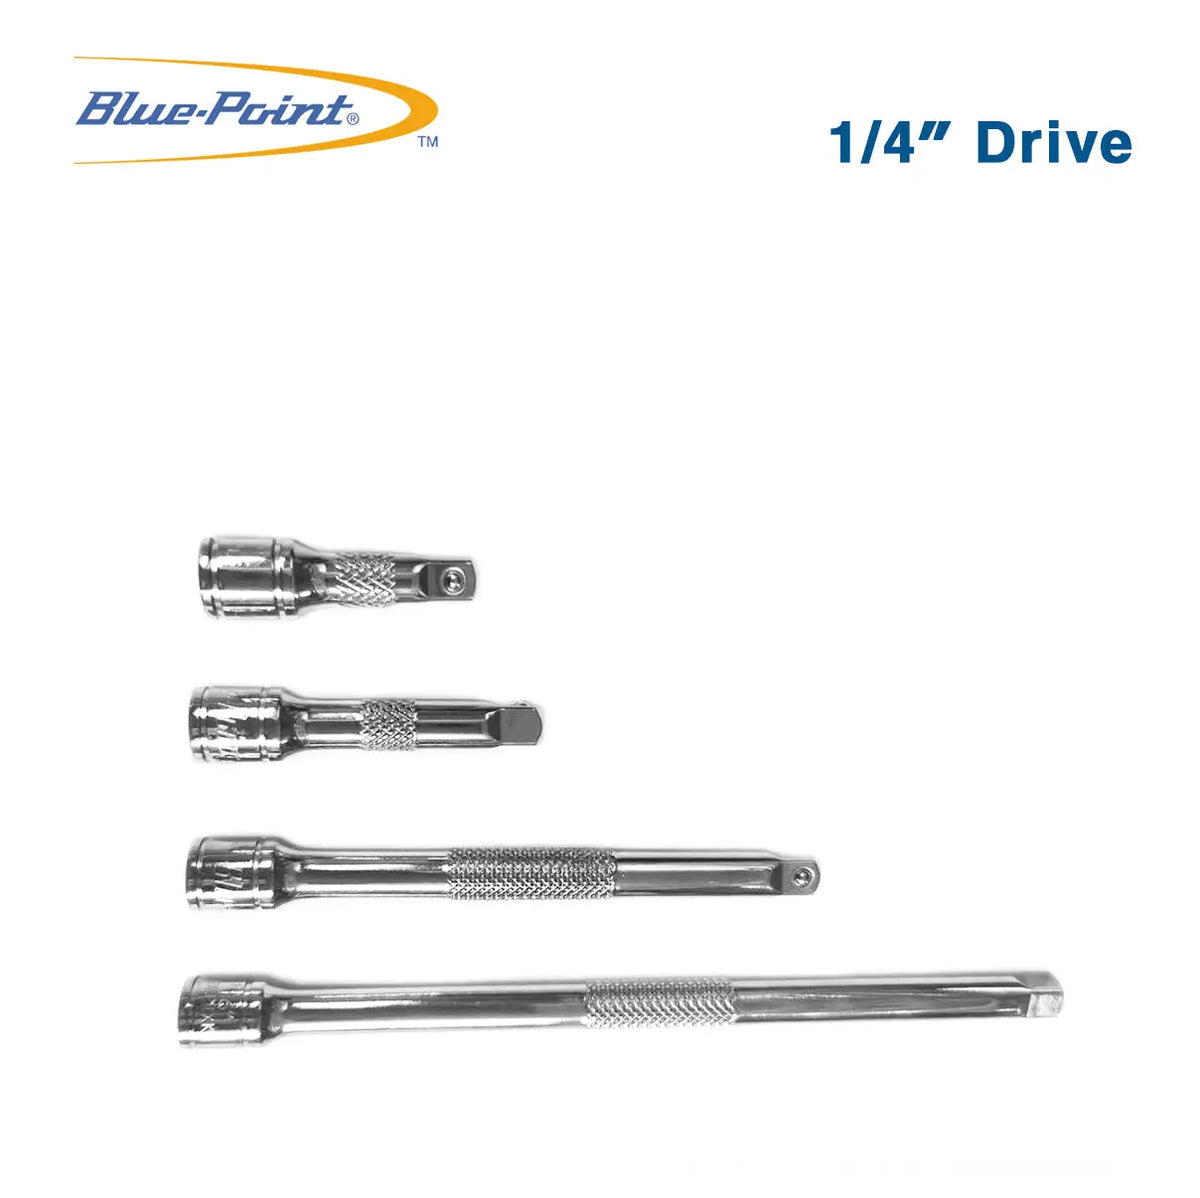 Blue Point 1/4 Drive Extensions 1.5", 2", 4", 6" BluePoint